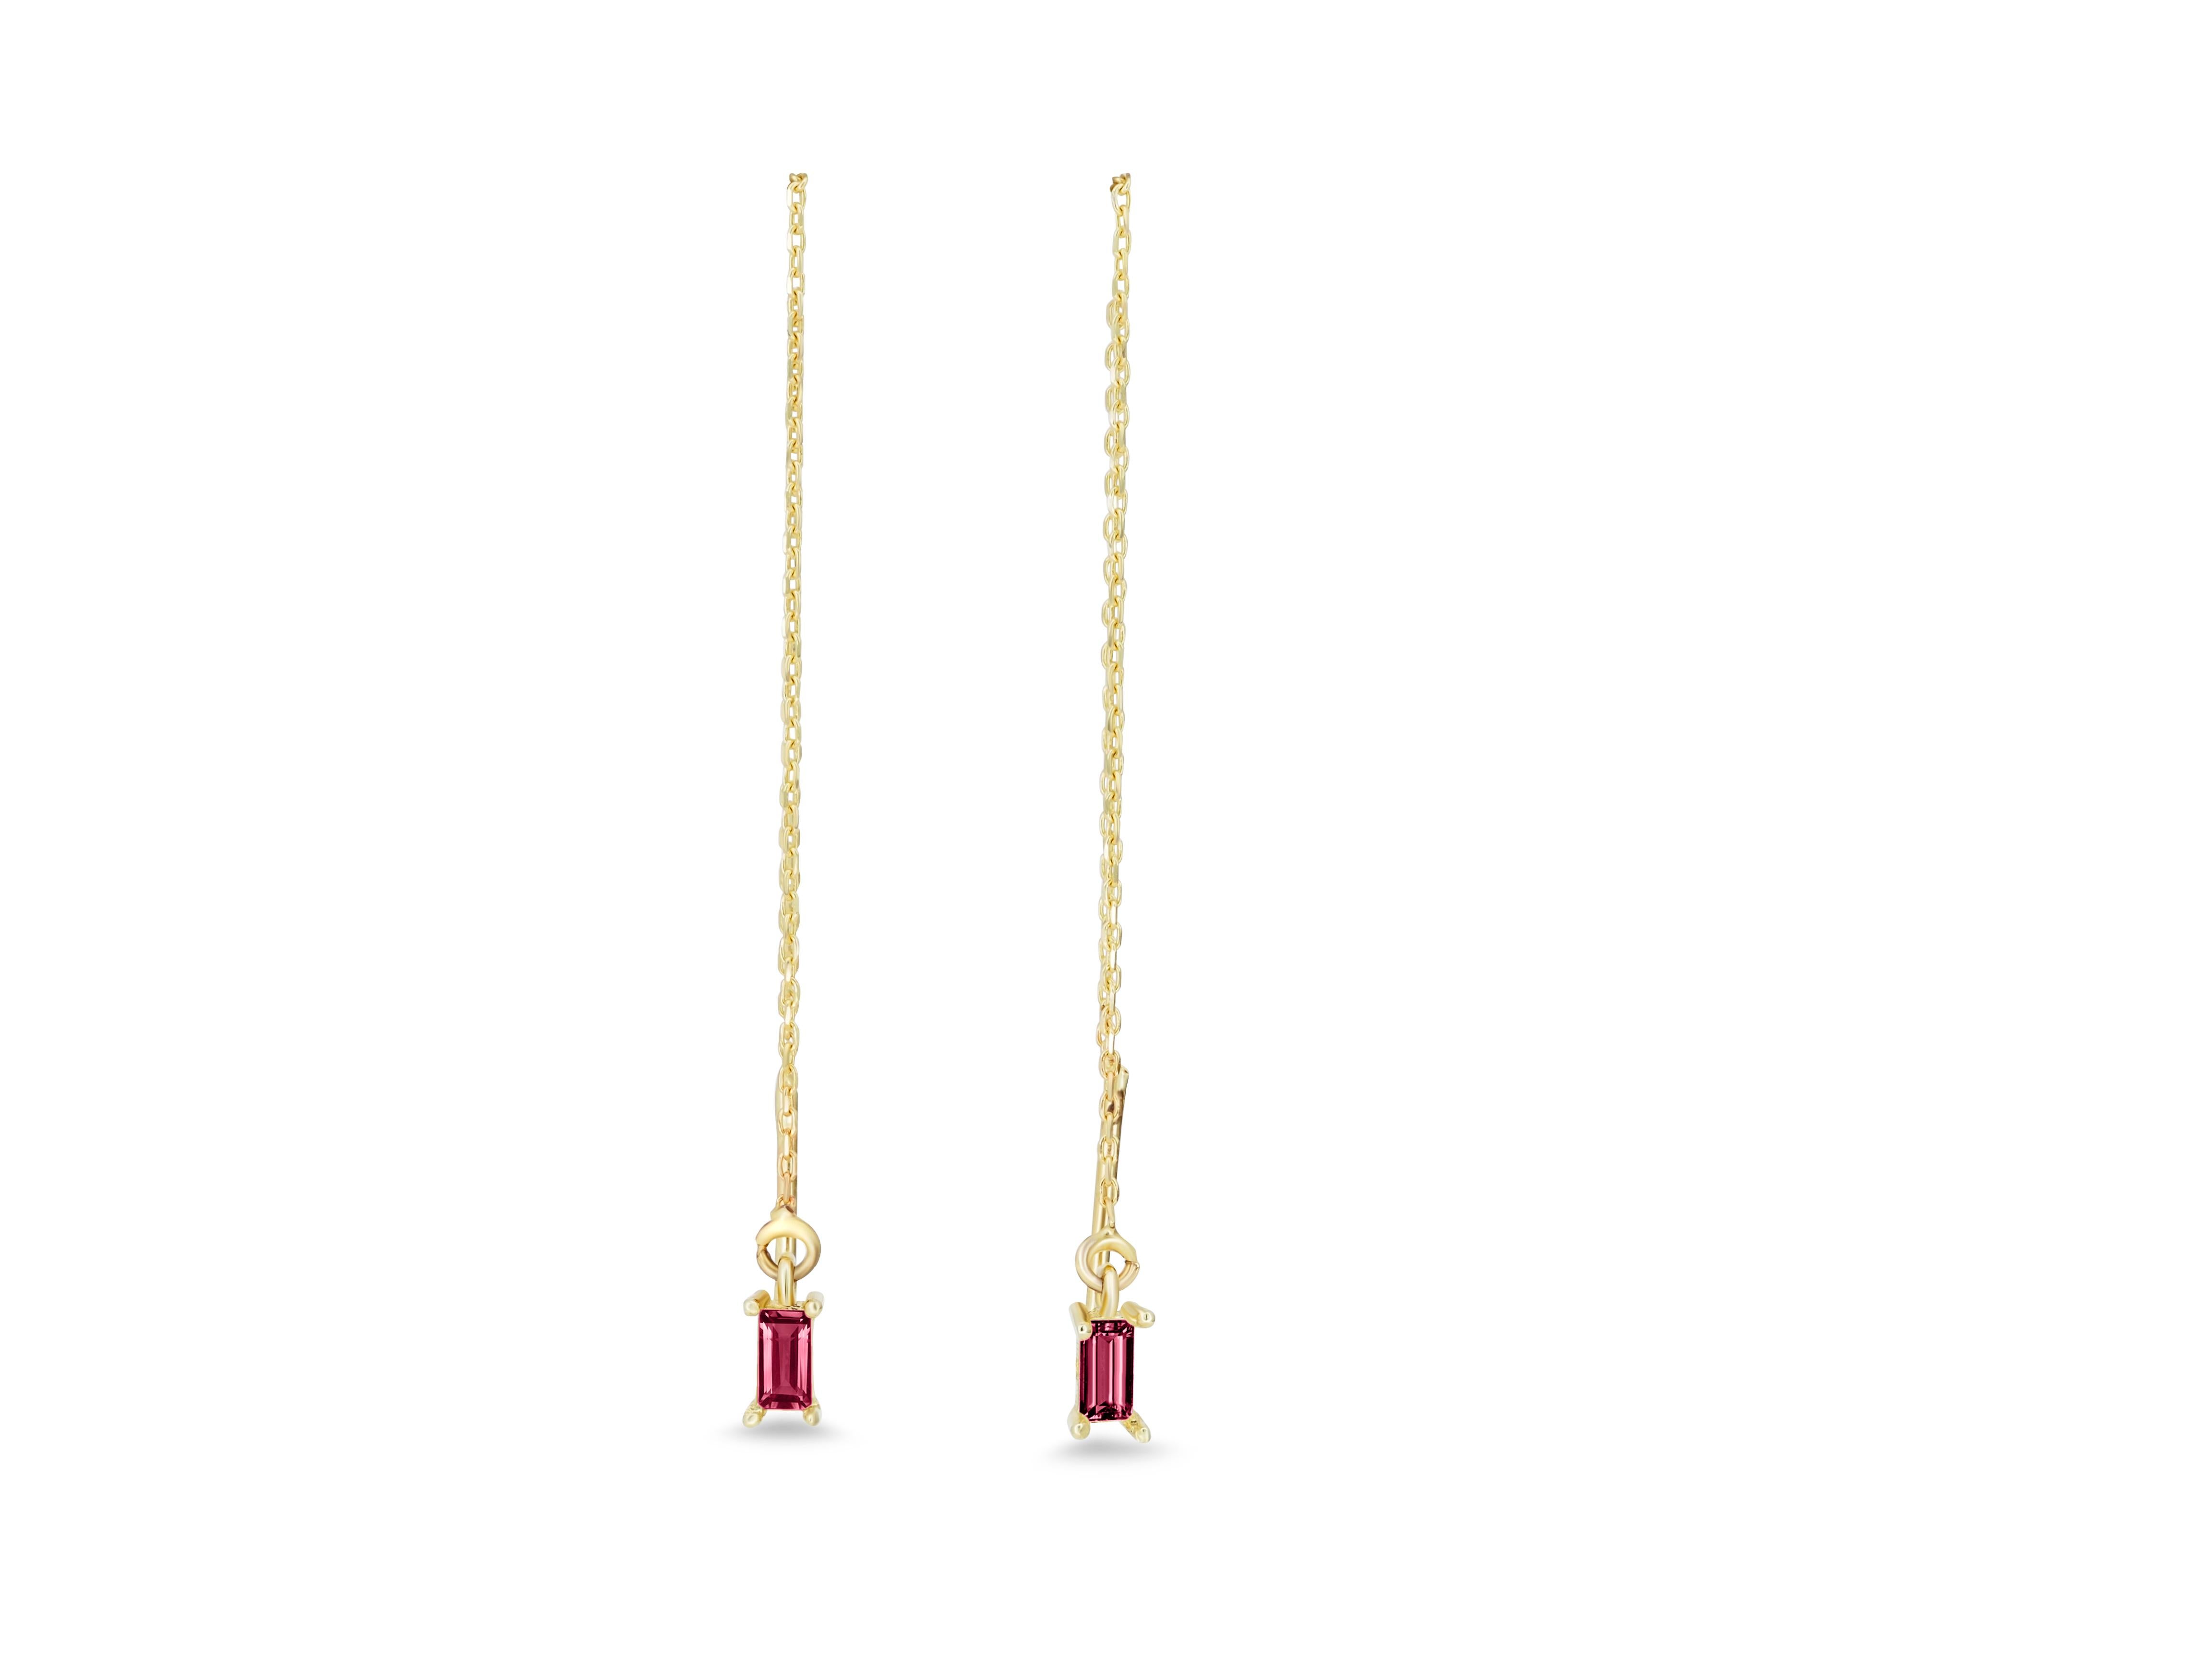 Baguette Cut Chain 14k Gold Earrings with Natural Rubies For Sale